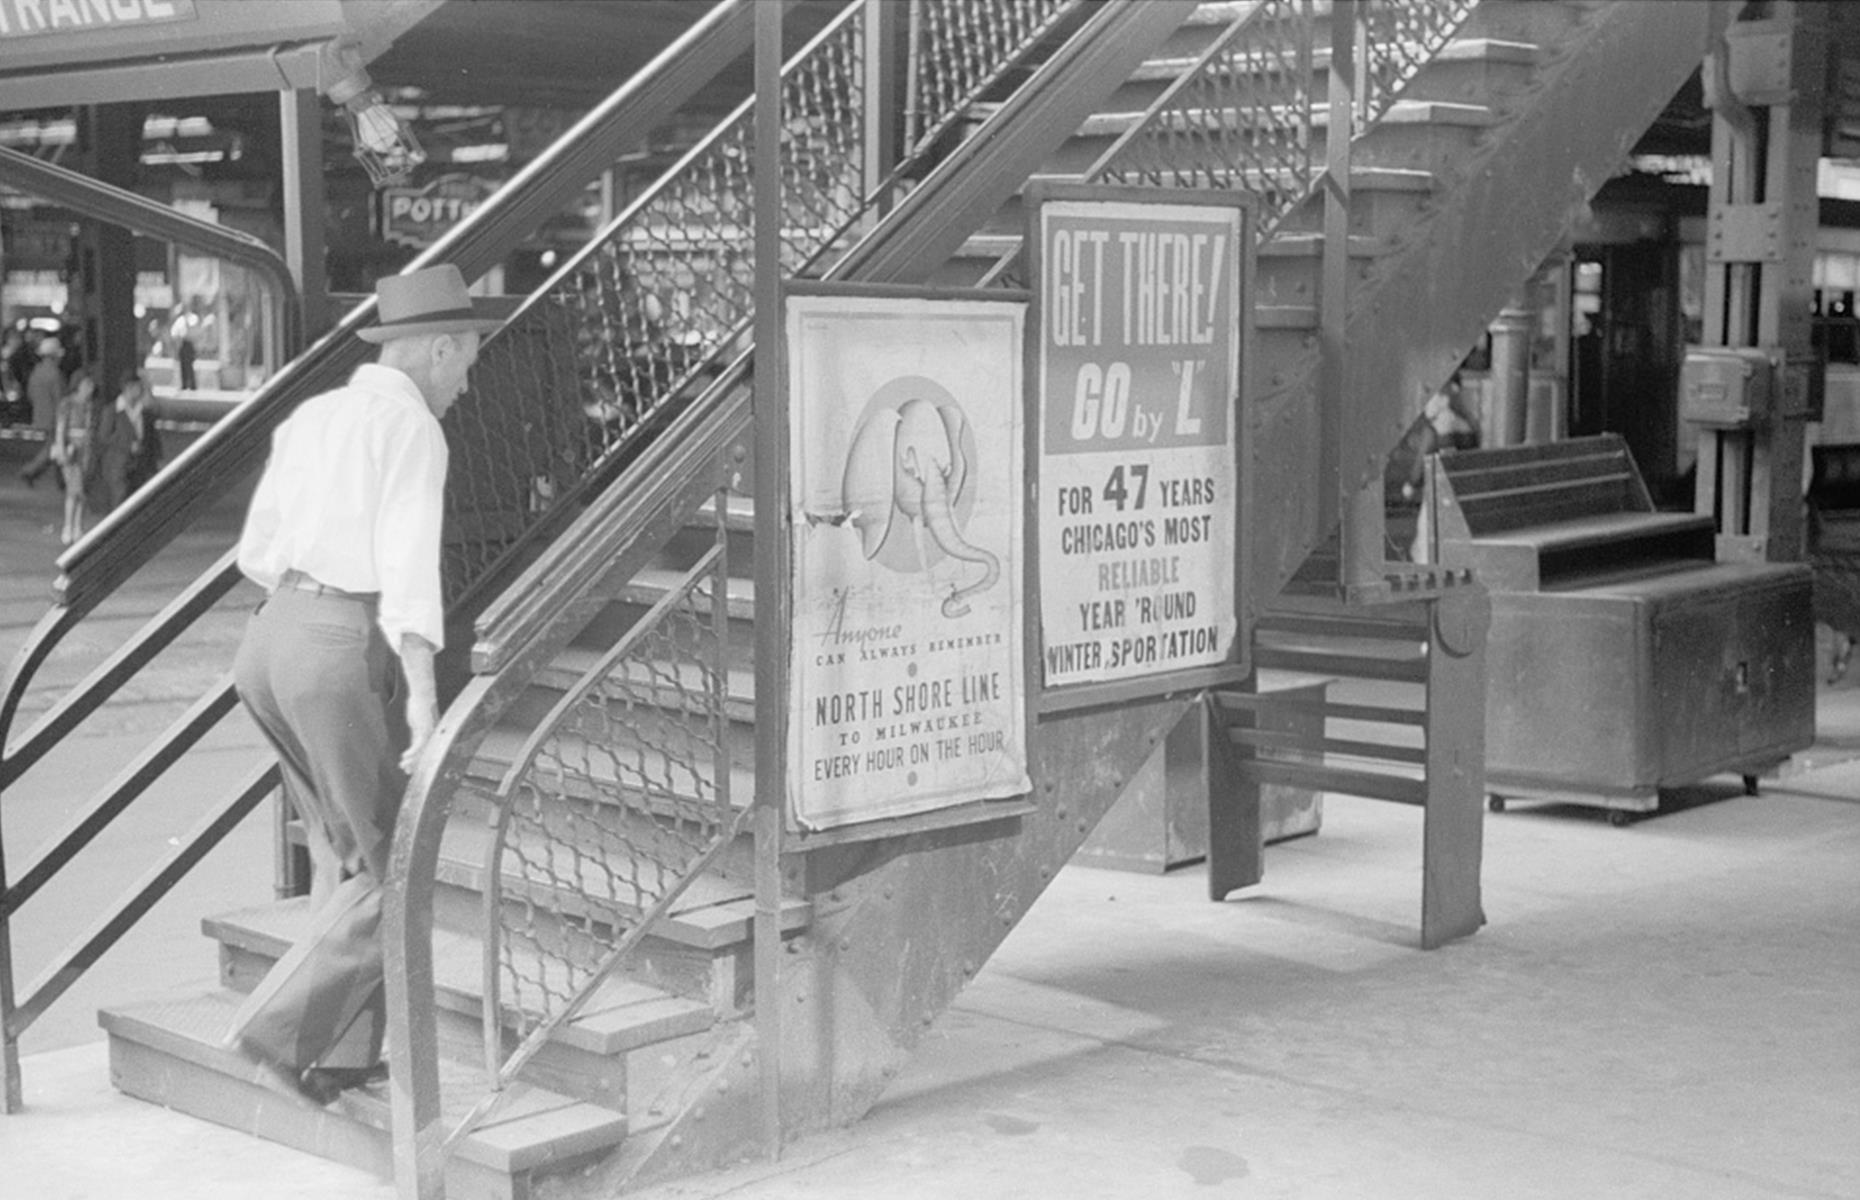 From one American mega city to another: Chicago's subway network began in the 1940s. The Chicago "L" – the Windy City's rapid transit system – has its roots in the 1890s, but it wasn't until 1943 that its underground sections began operating. This snap from the Forties shows a man exiting a Chicago "L" station. Notice the proud promo poster touting the system as the city's most "reliable" form of transportation.